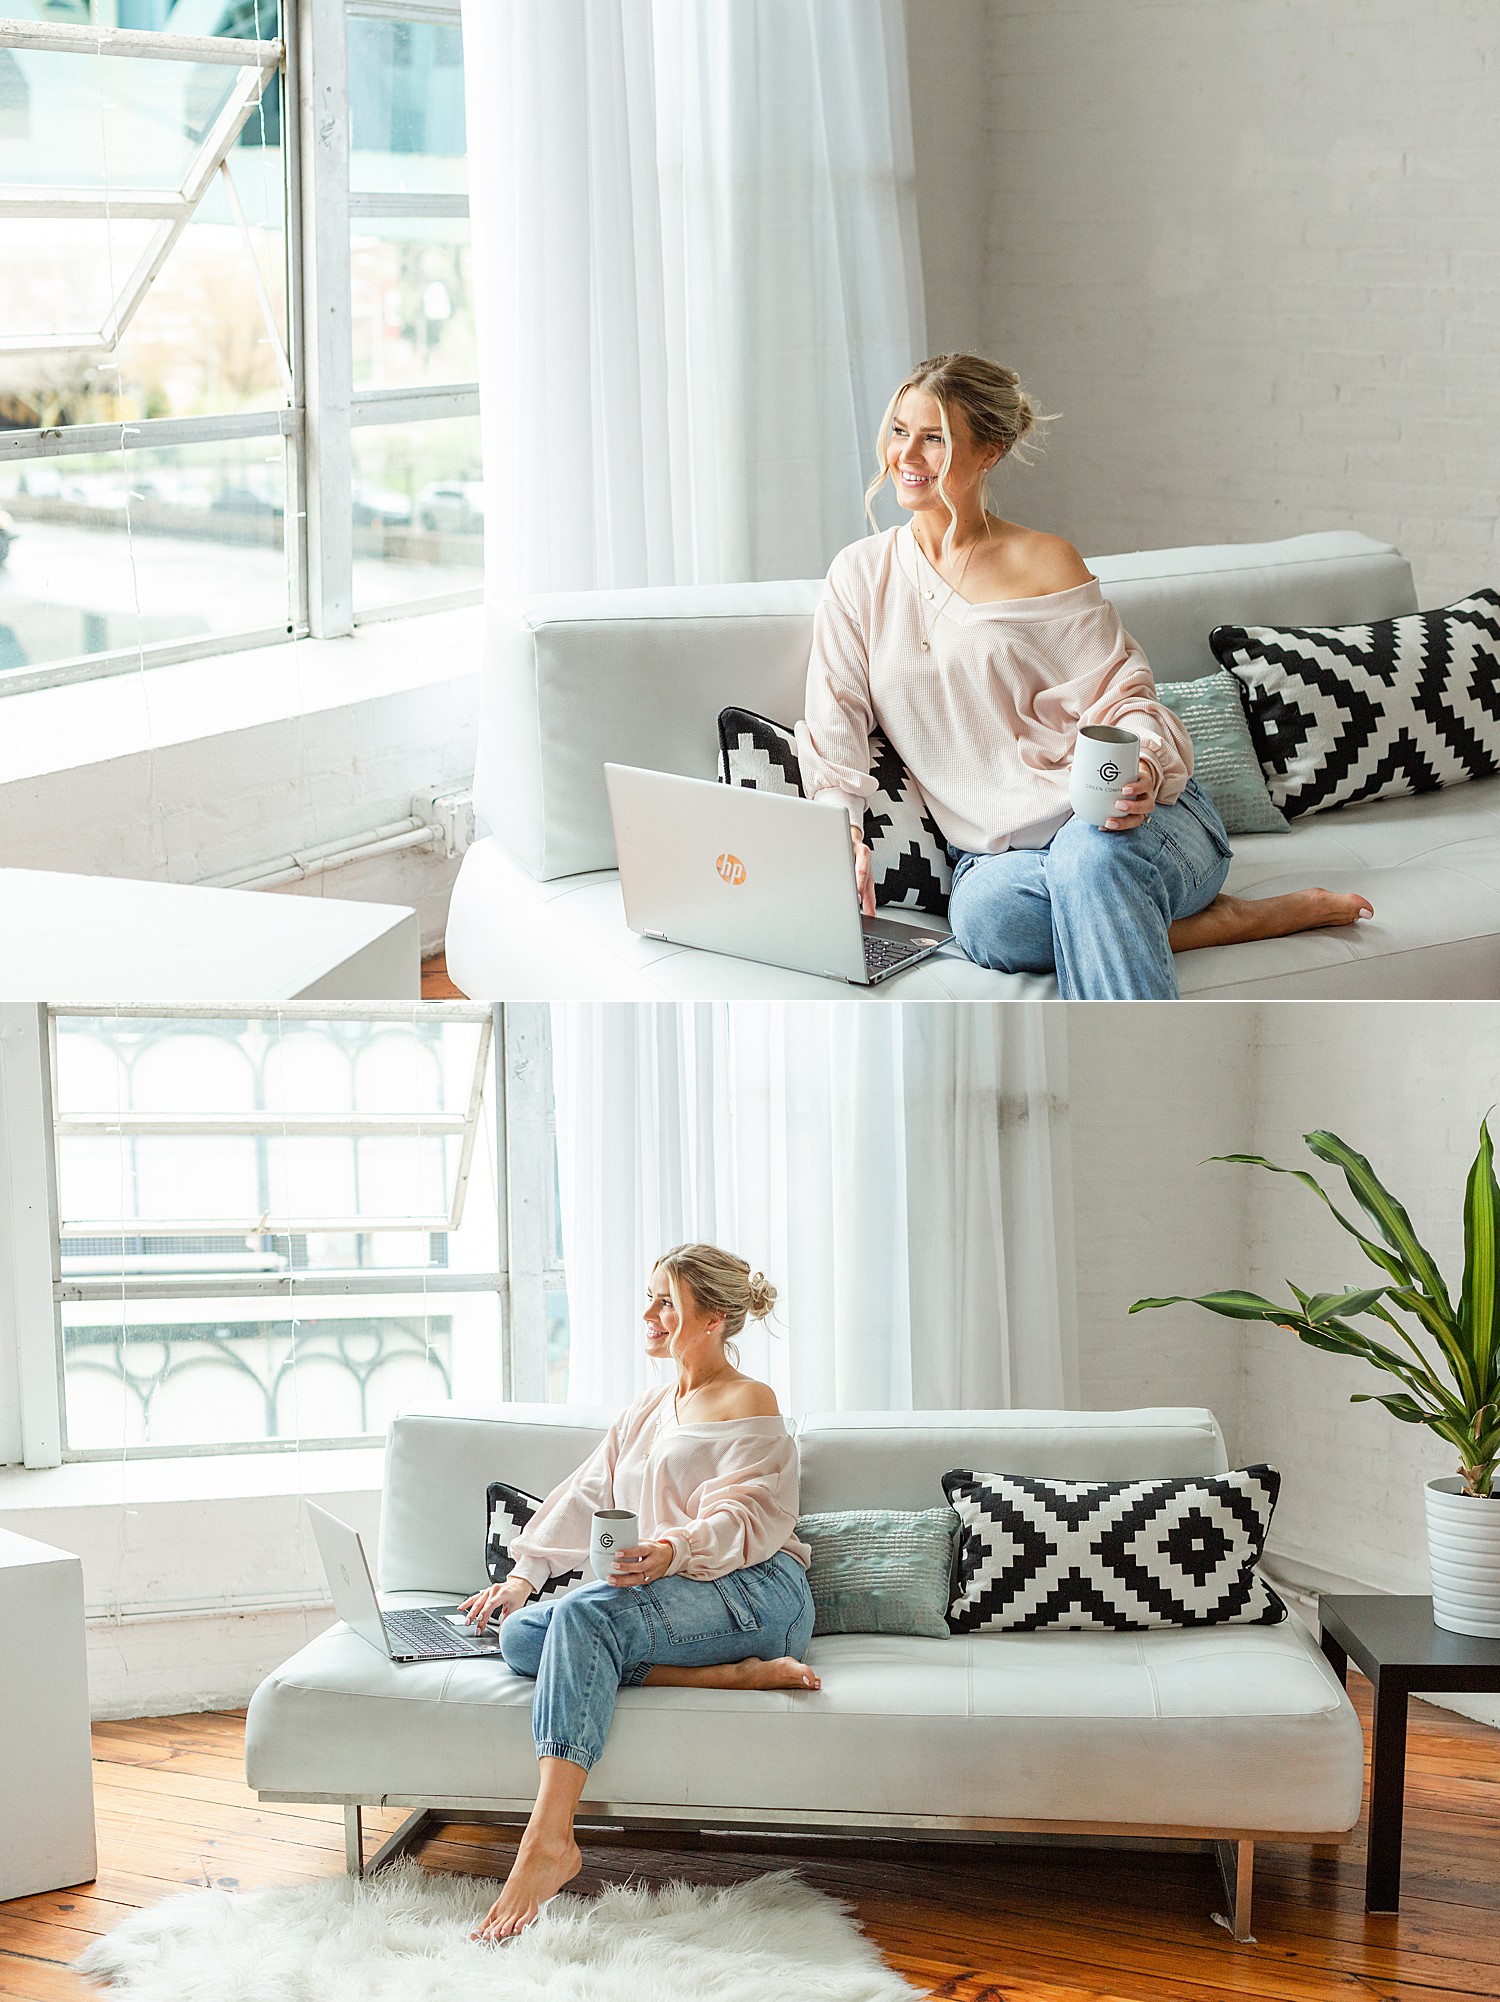 Female Business Owner and CEO sits on couch during Branding Photos by Jocelyn Cruz Photography